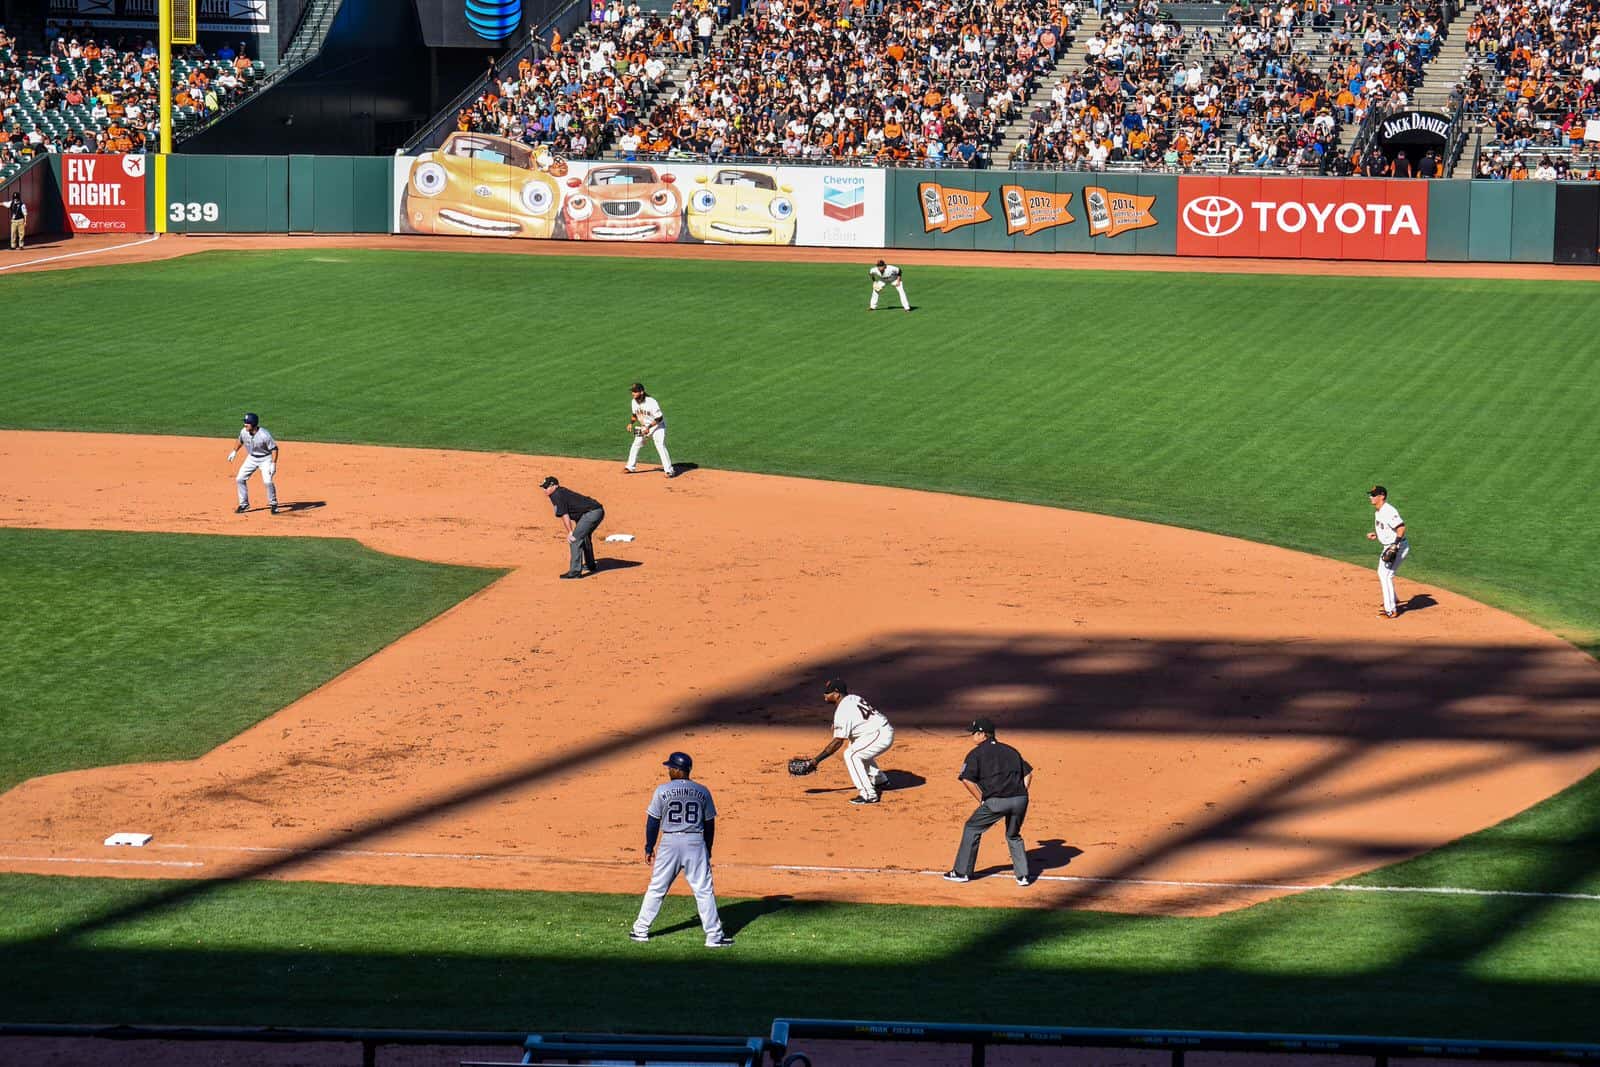 Outdoor advertising, as seen at this San Fransisco Giants game, can be seen on the outfield wall and stadium tunnels.